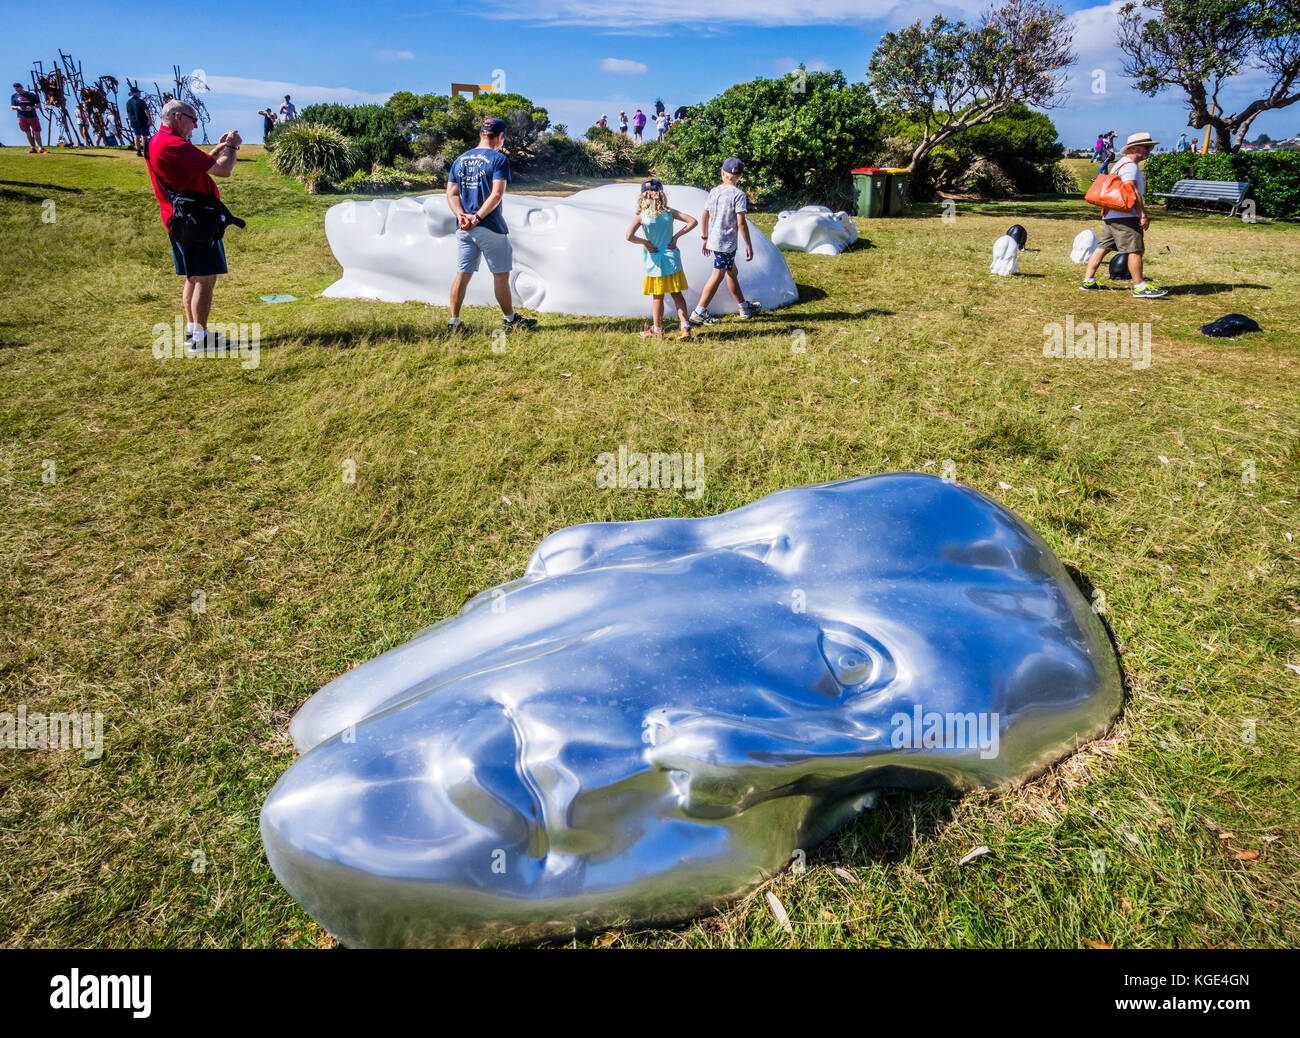 Sculpture by the sea 2017, annual exhibition on the coastal walk between Bondi and Tamara Beach, Sydney, New South Wales, Australia. Sculpture Group t Stock Photo